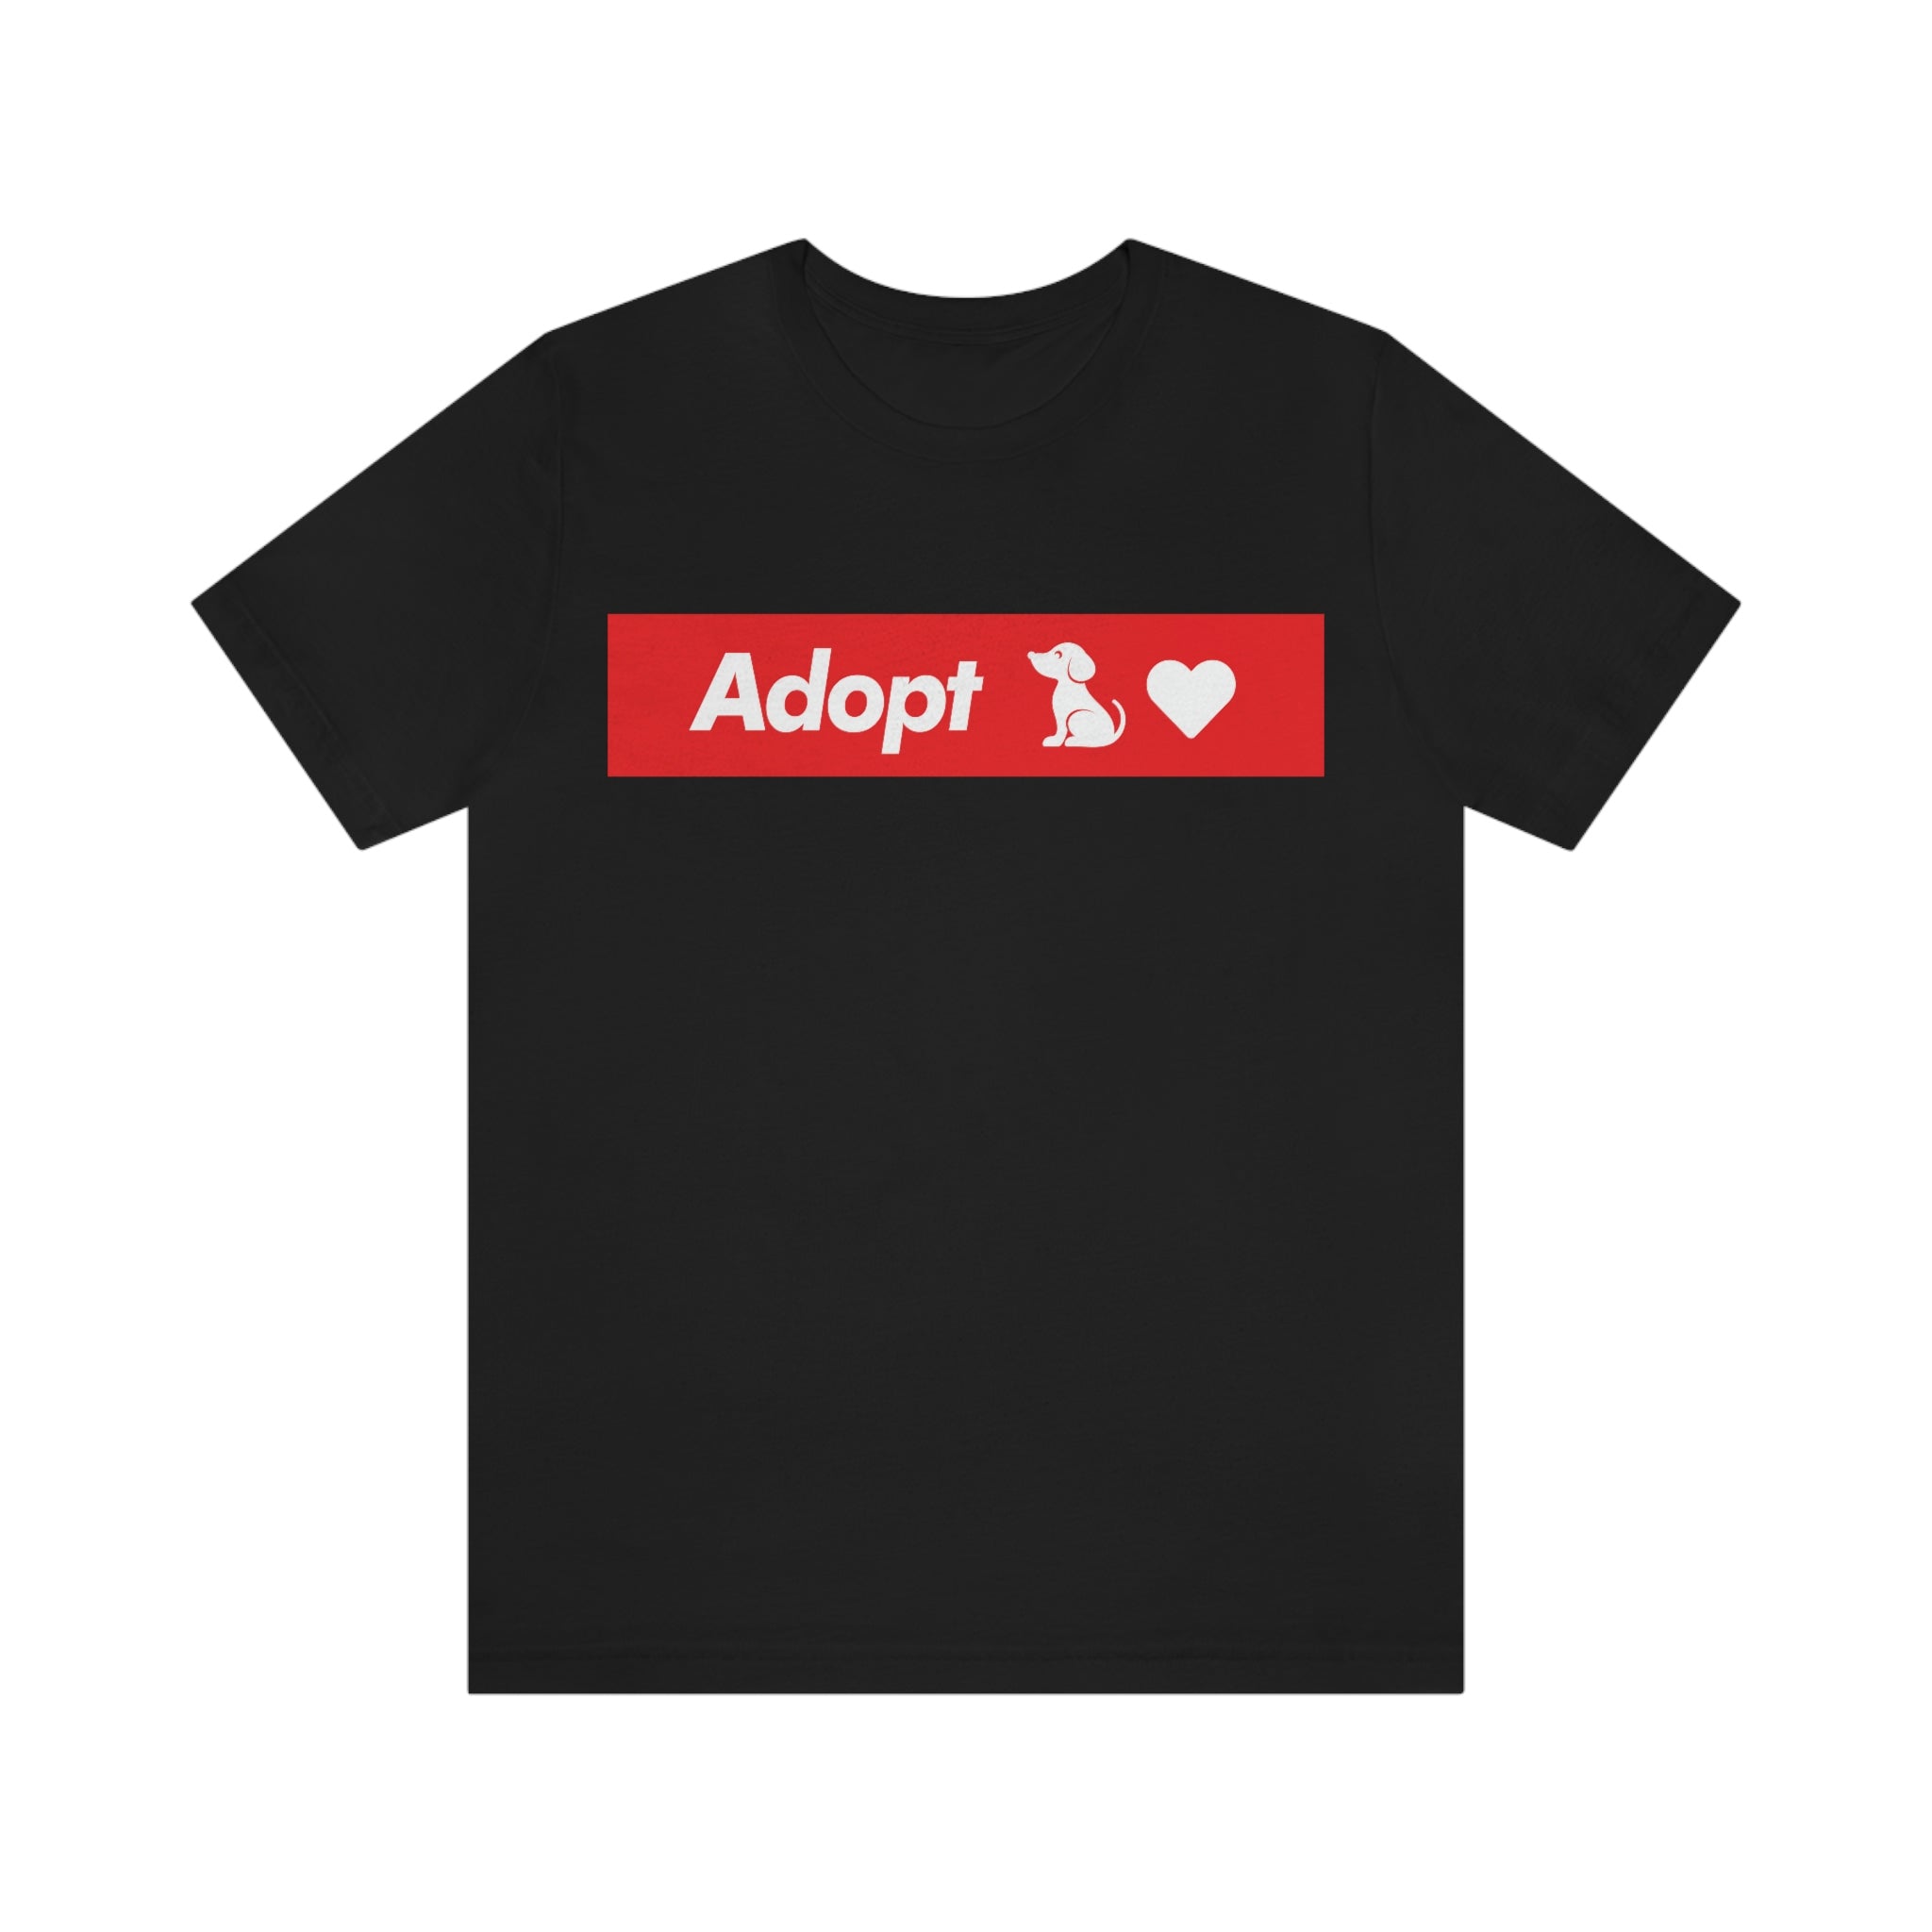 Adopt Love Rescue Dog - RED BANNER : Unisex 100% Comfy Cotton T-Shirt, Supporting Humane Animal Shelters